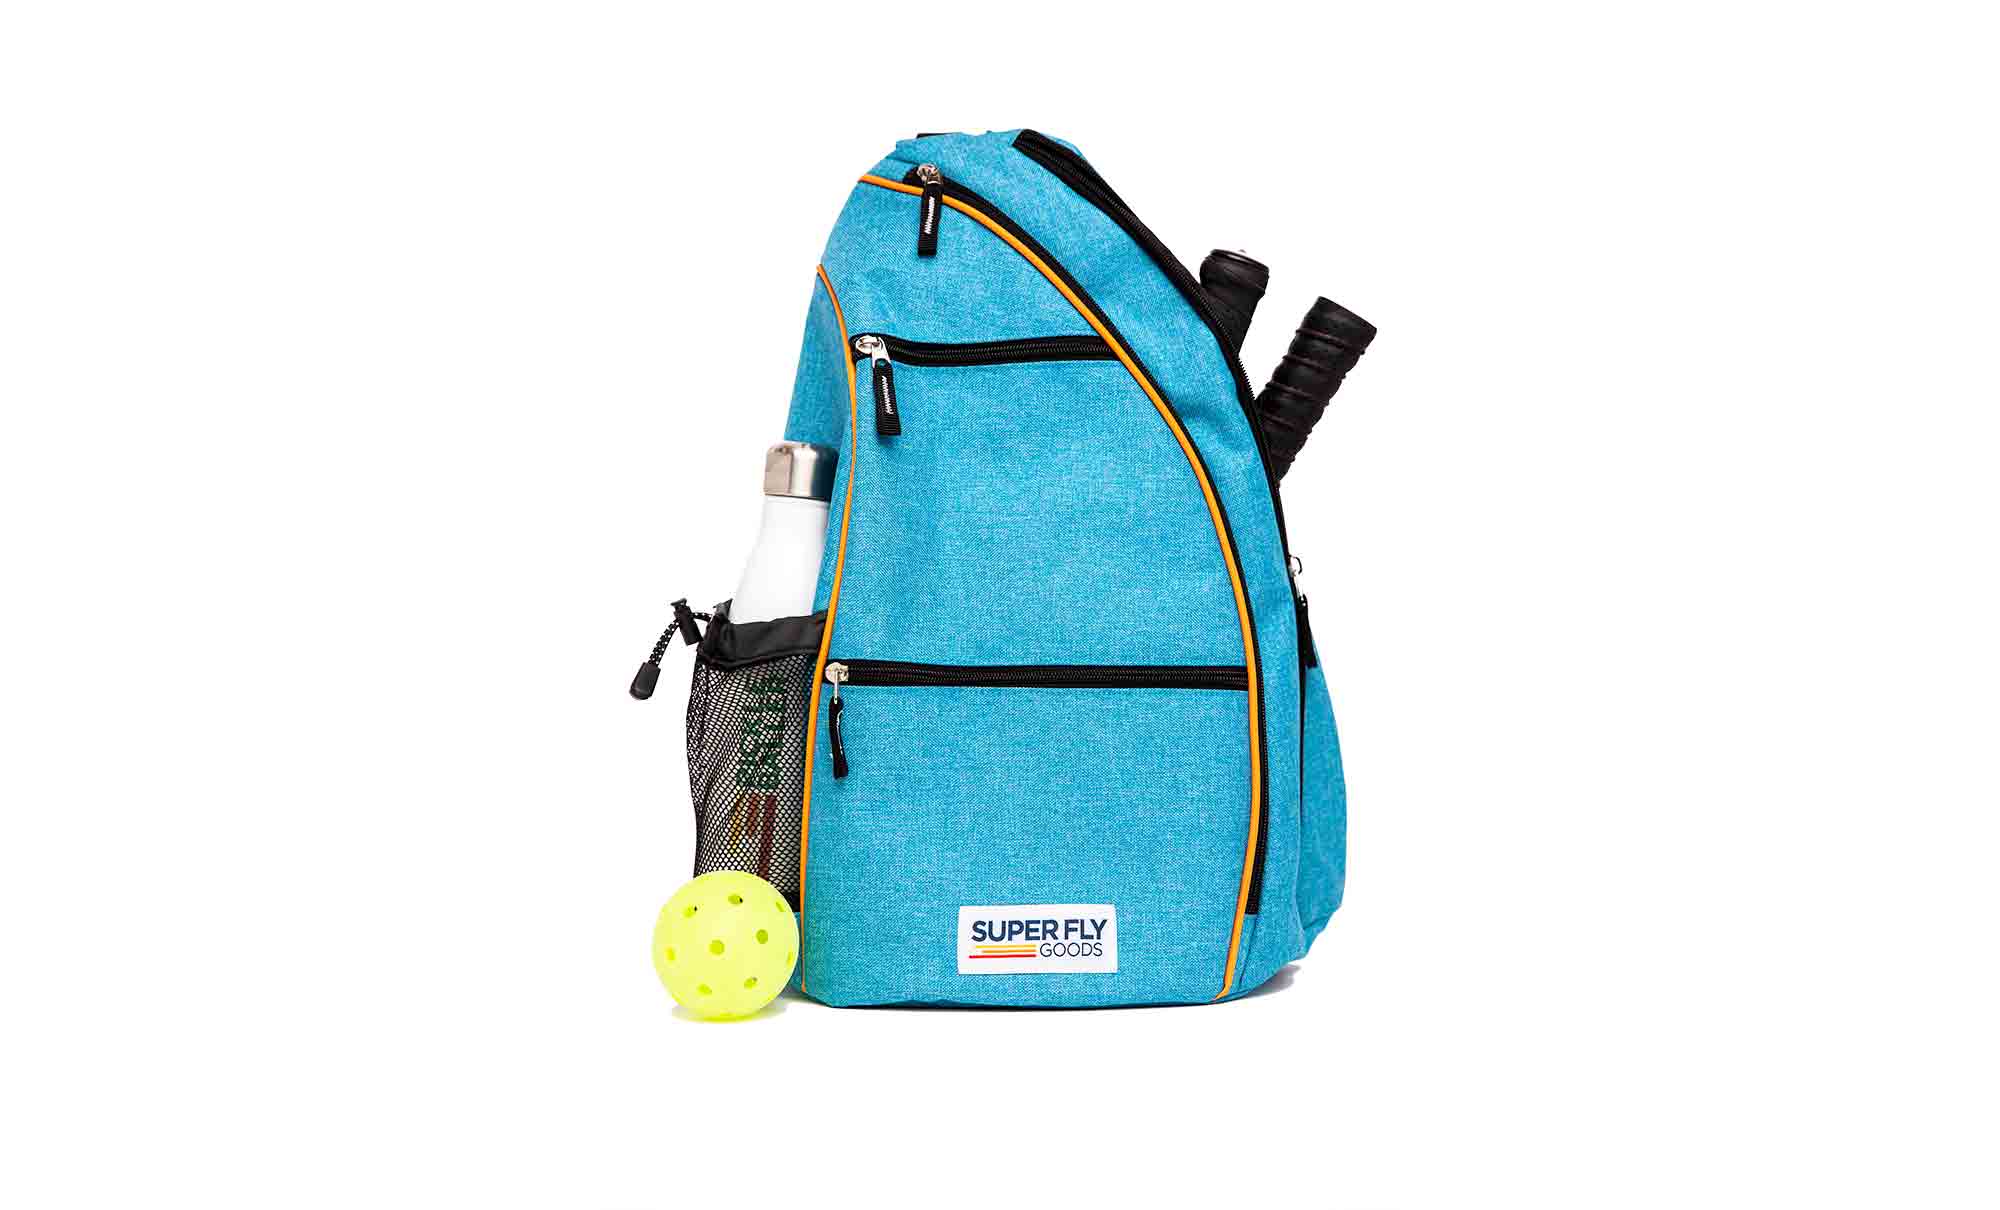 A Sporty Backpack Photographed on white Amazon Product